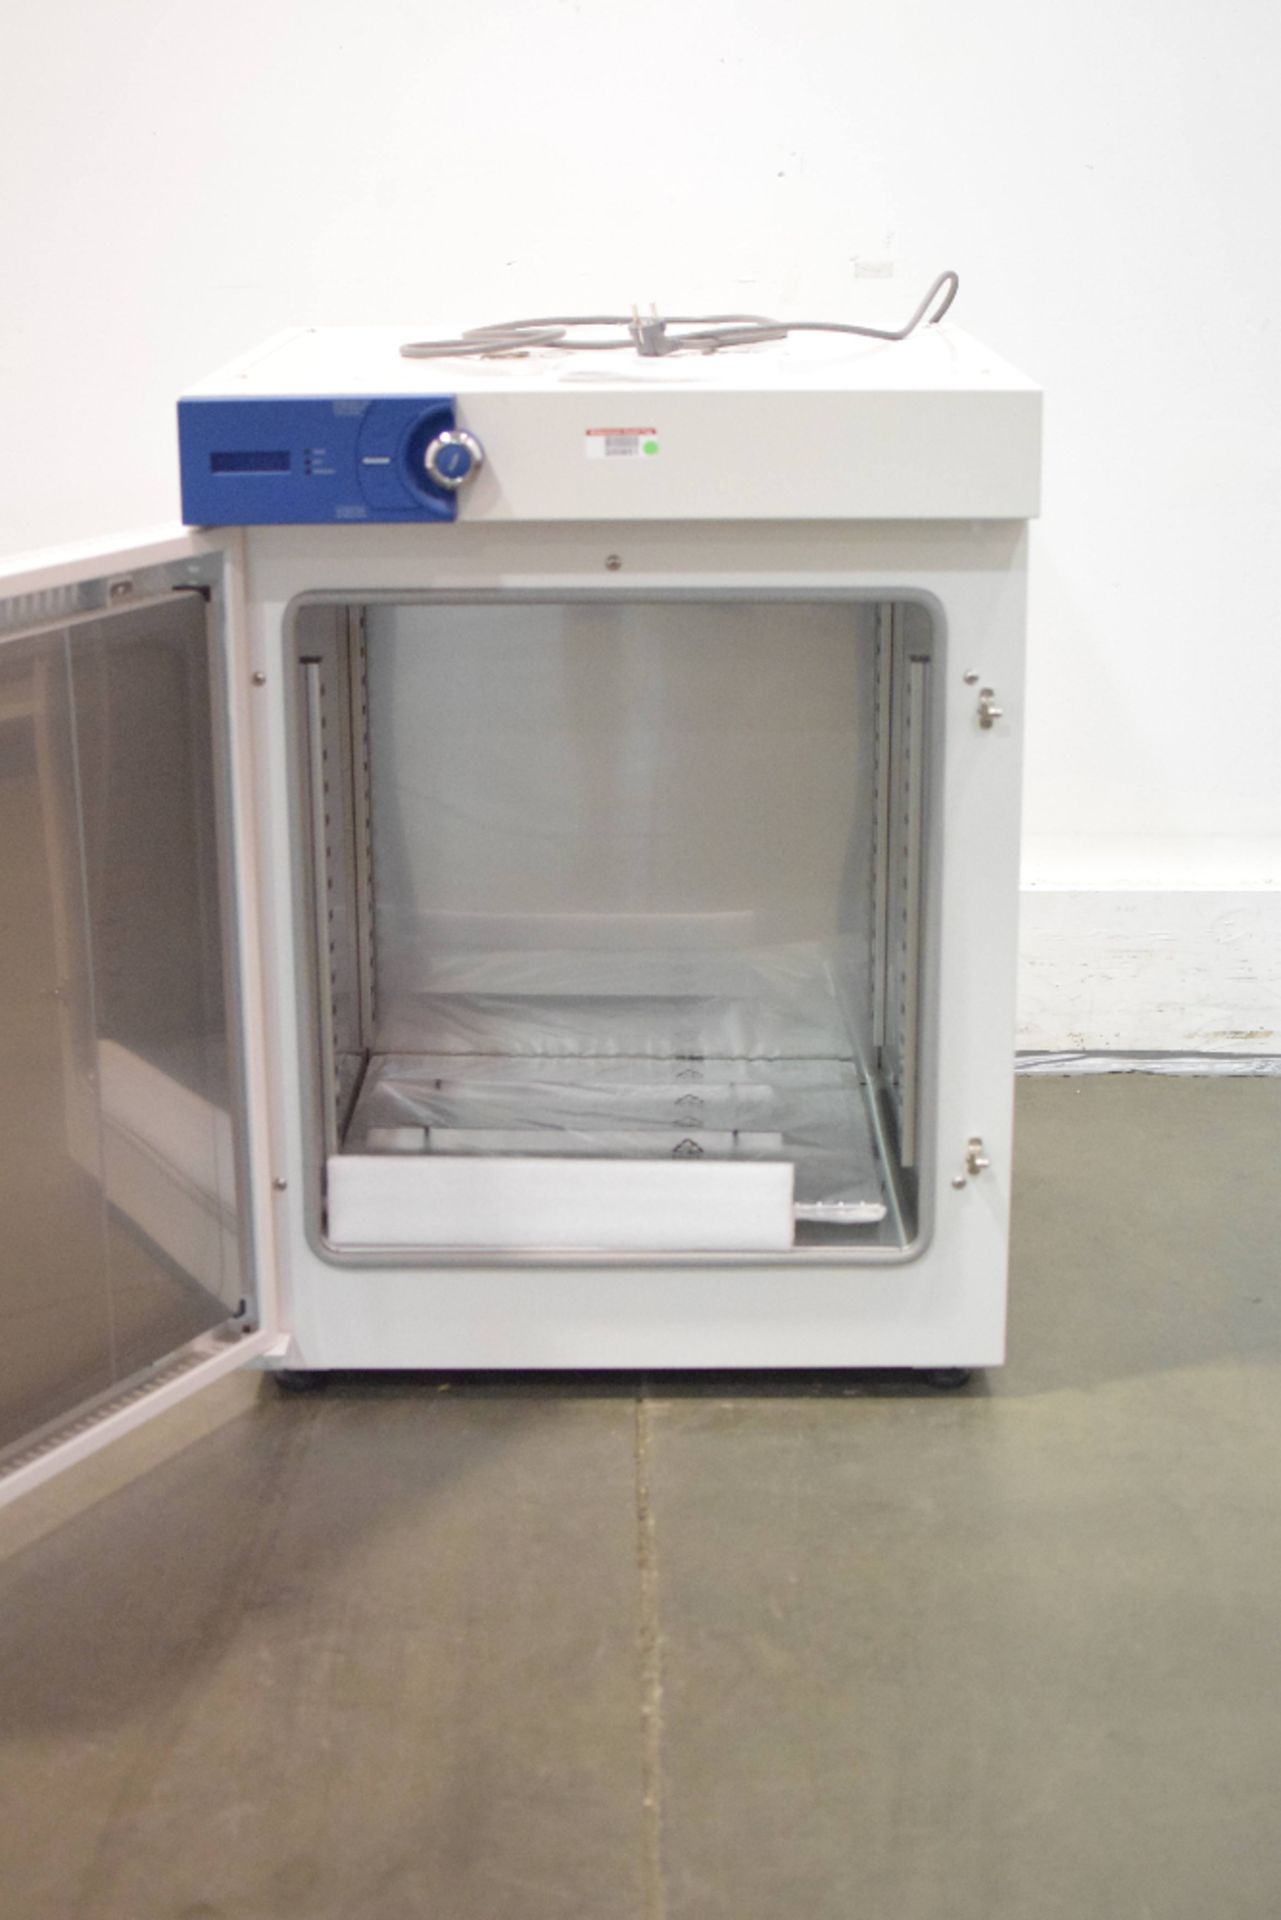 VWR 414005-112 Gravity Convection Oven - Image 3 of 3